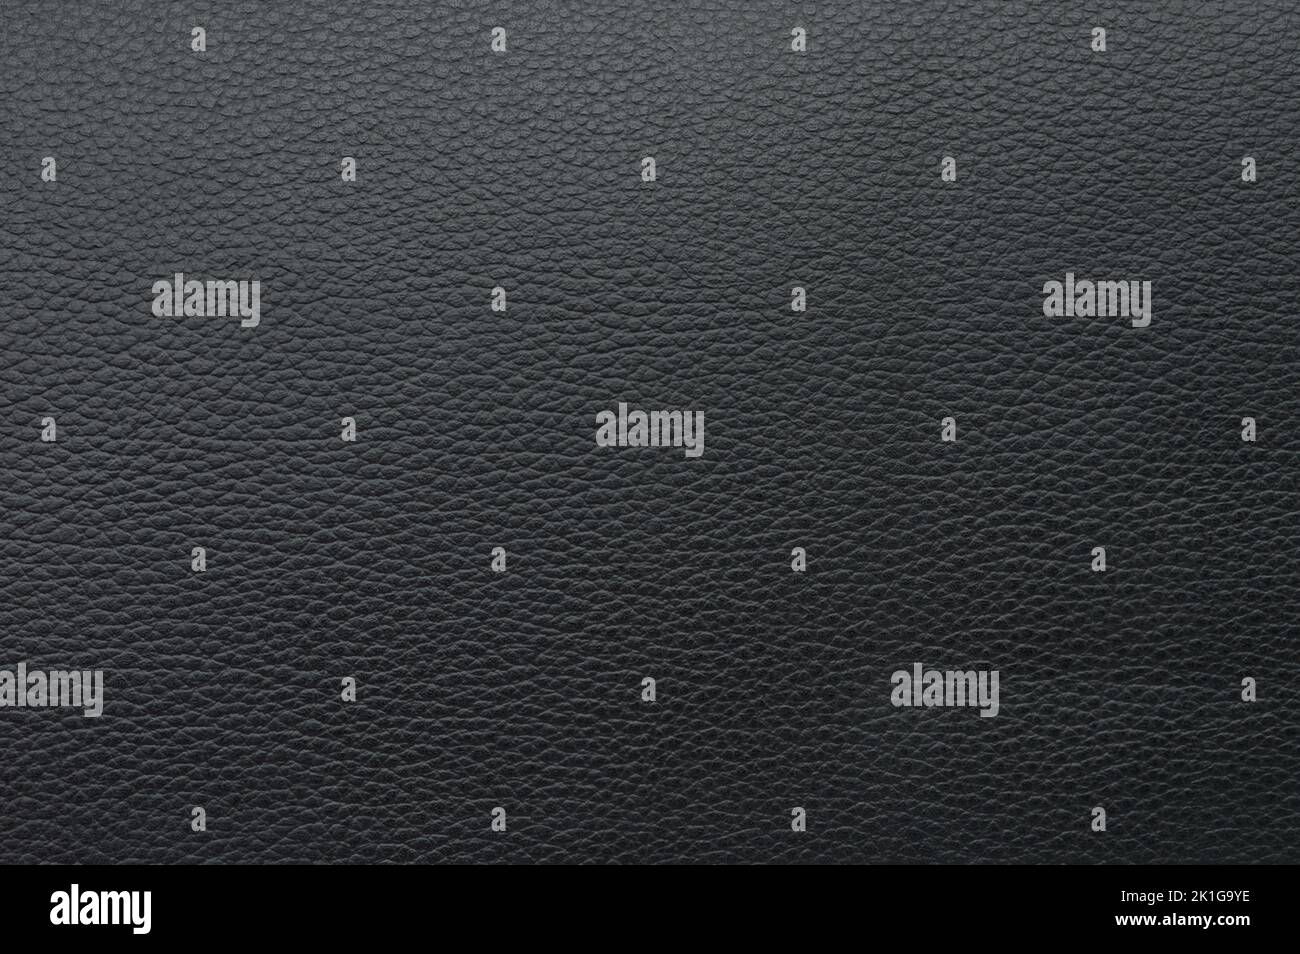 Seamless pattern of black leather surface macro close up view Stock Photo